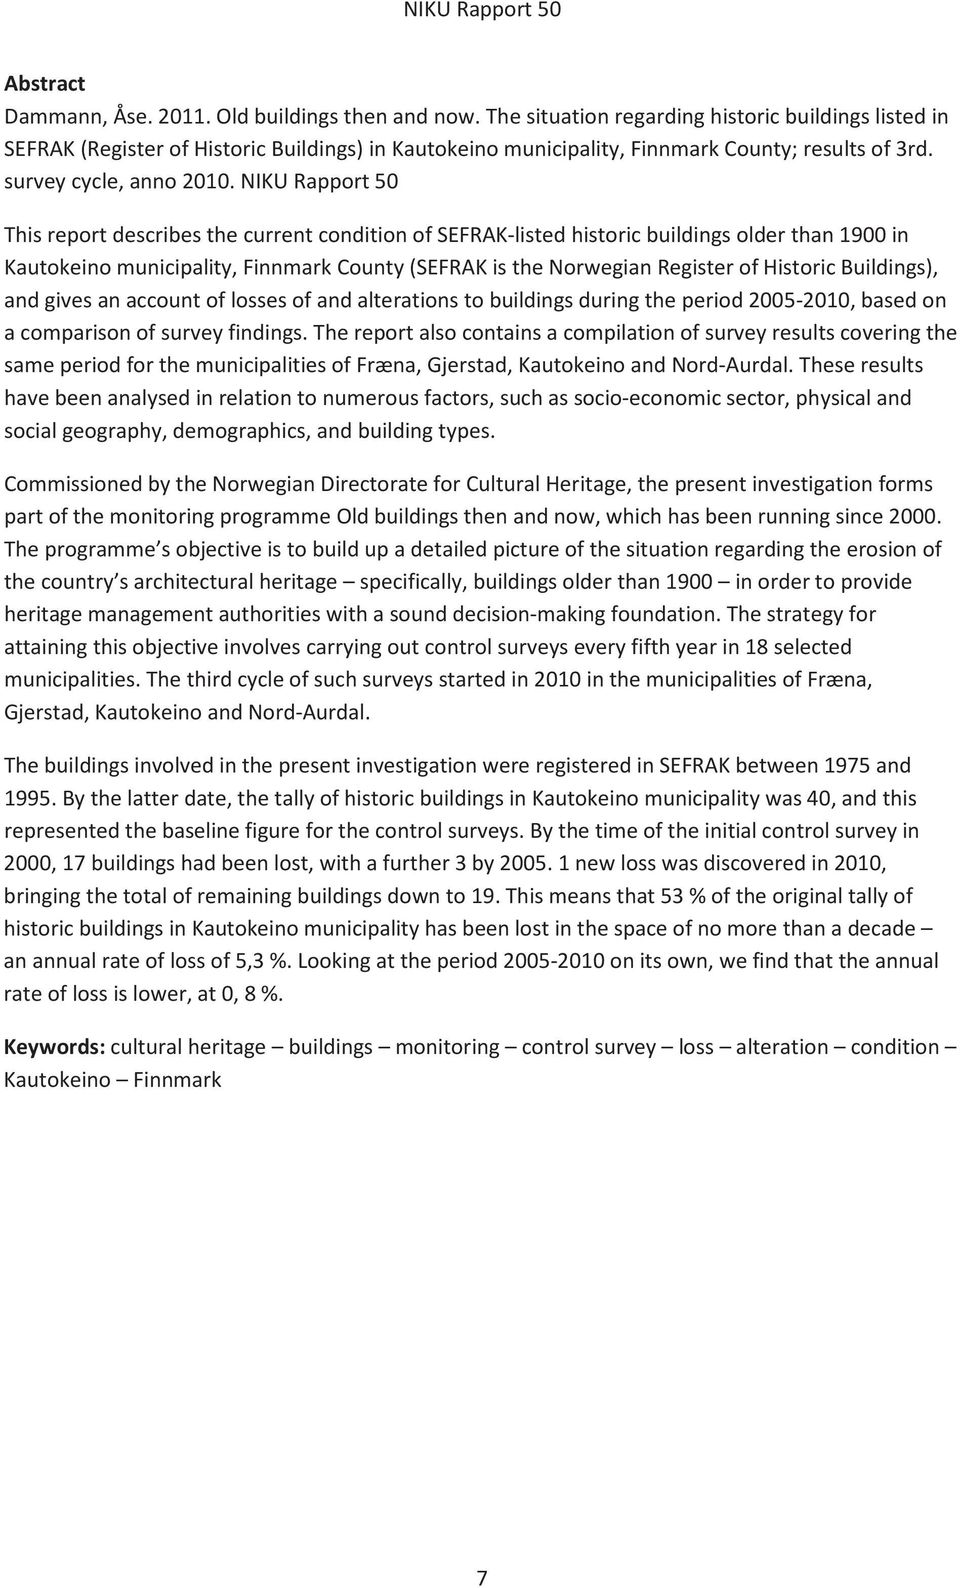 NIKU Rapport 50 This report describes the current condition of SEFRAK-listed historic buildings older than 1900 in Kautokeino municipality, Finnmark County (SEFRAK is the Norwegian Register of